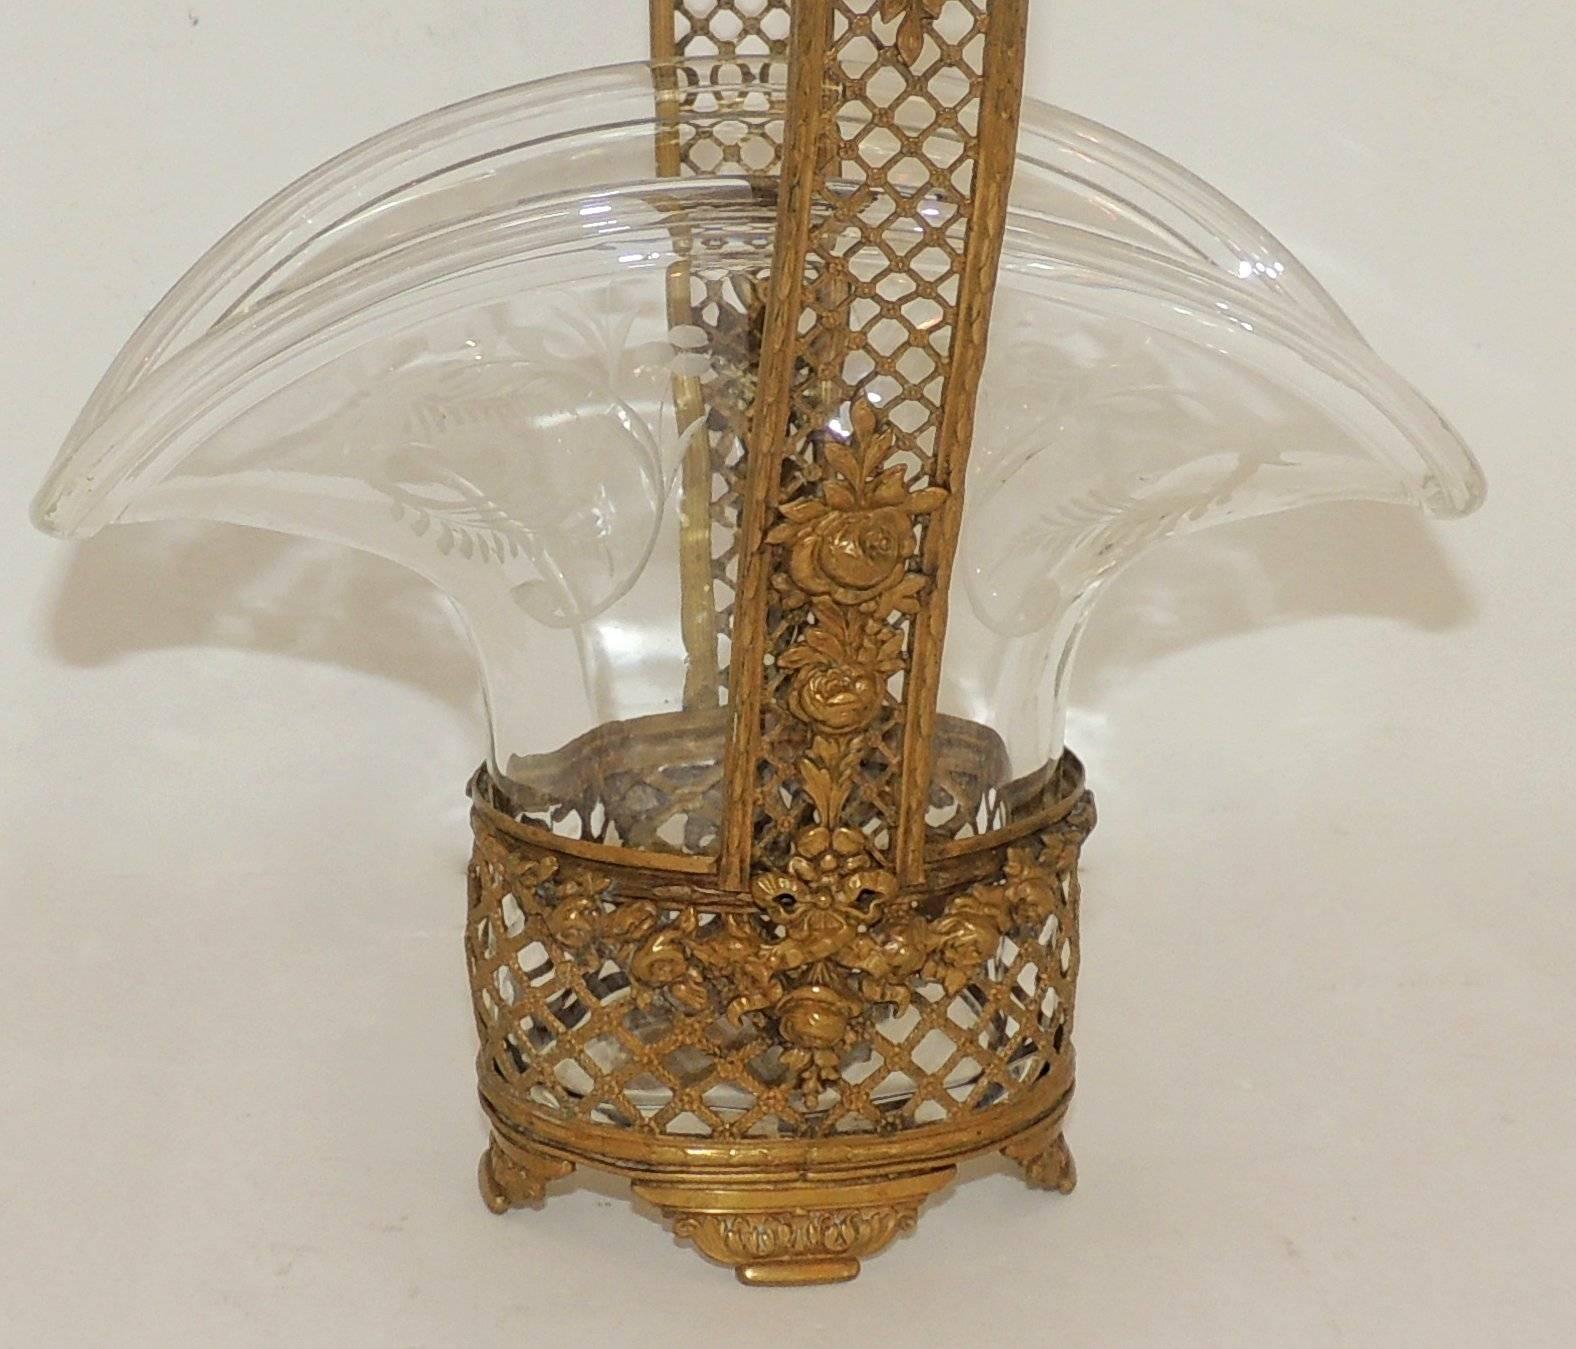 20th Century Wonderful French Gilt Bronze Roses Basket Etched Crystal Glass Bowl Centerpiece For Sale